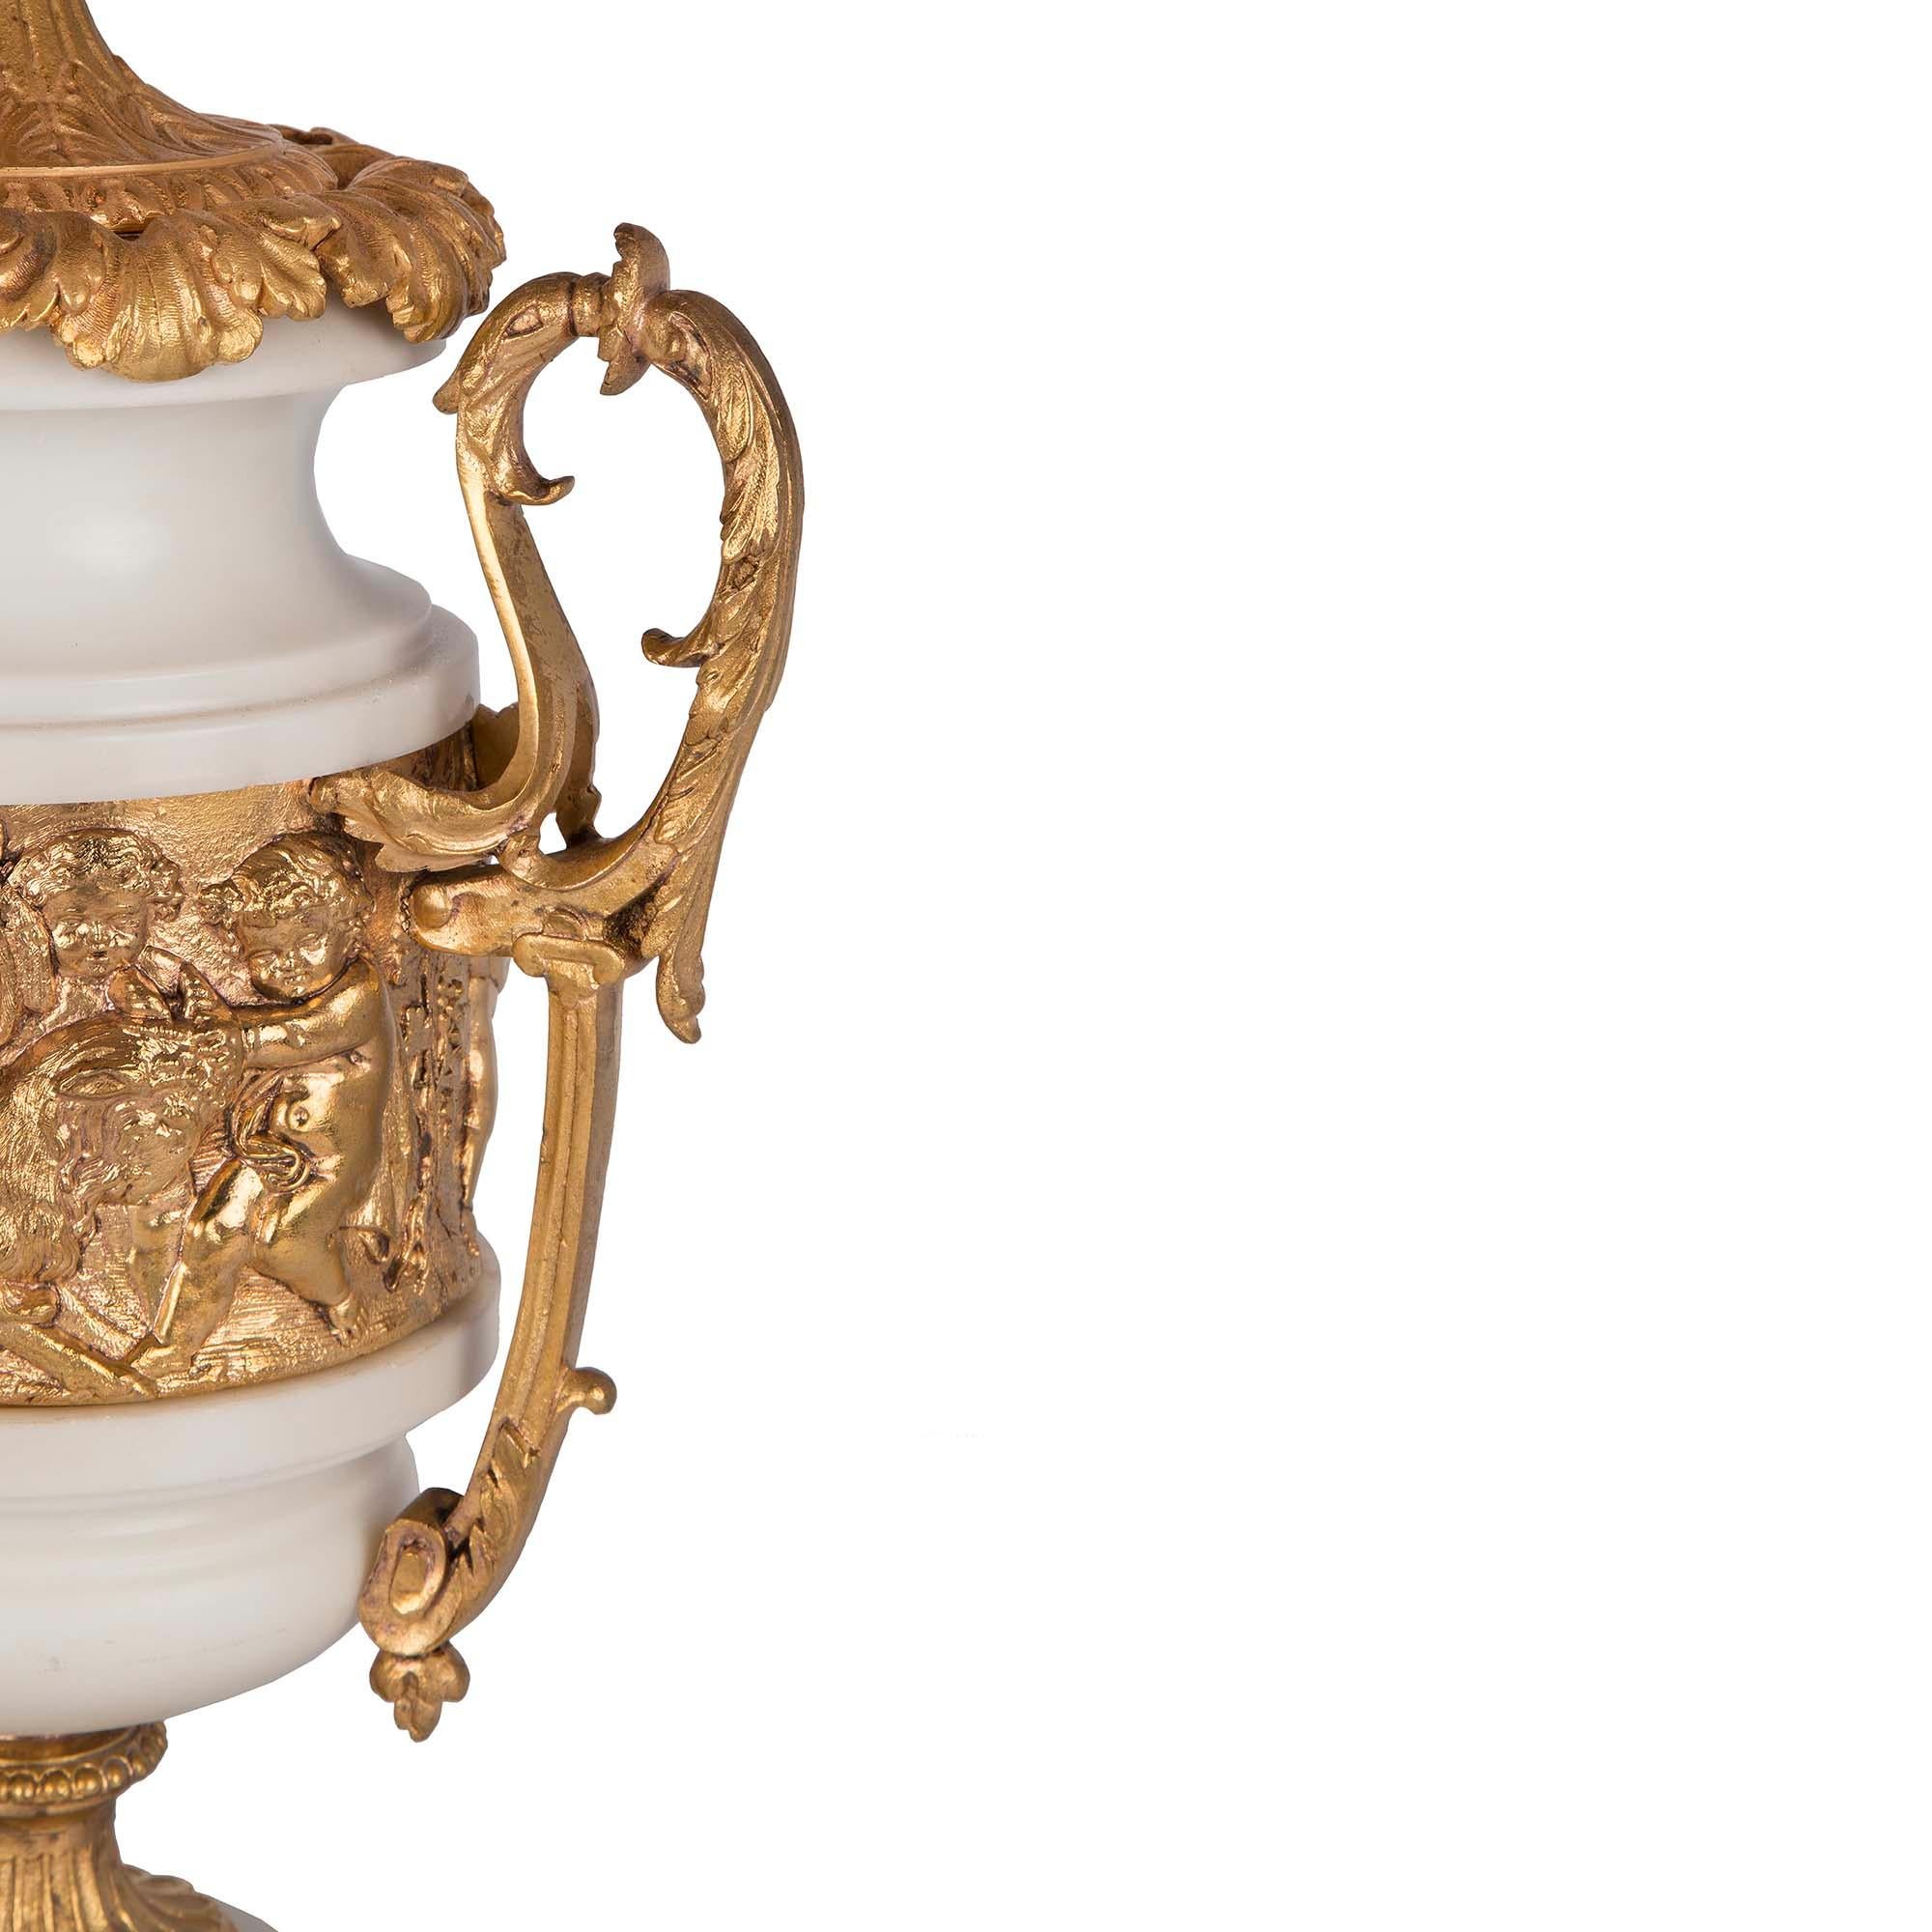 Pair of French 19th Century Louis XVI St. White Carrara Marble and Ormolu Lamps For Sale 2